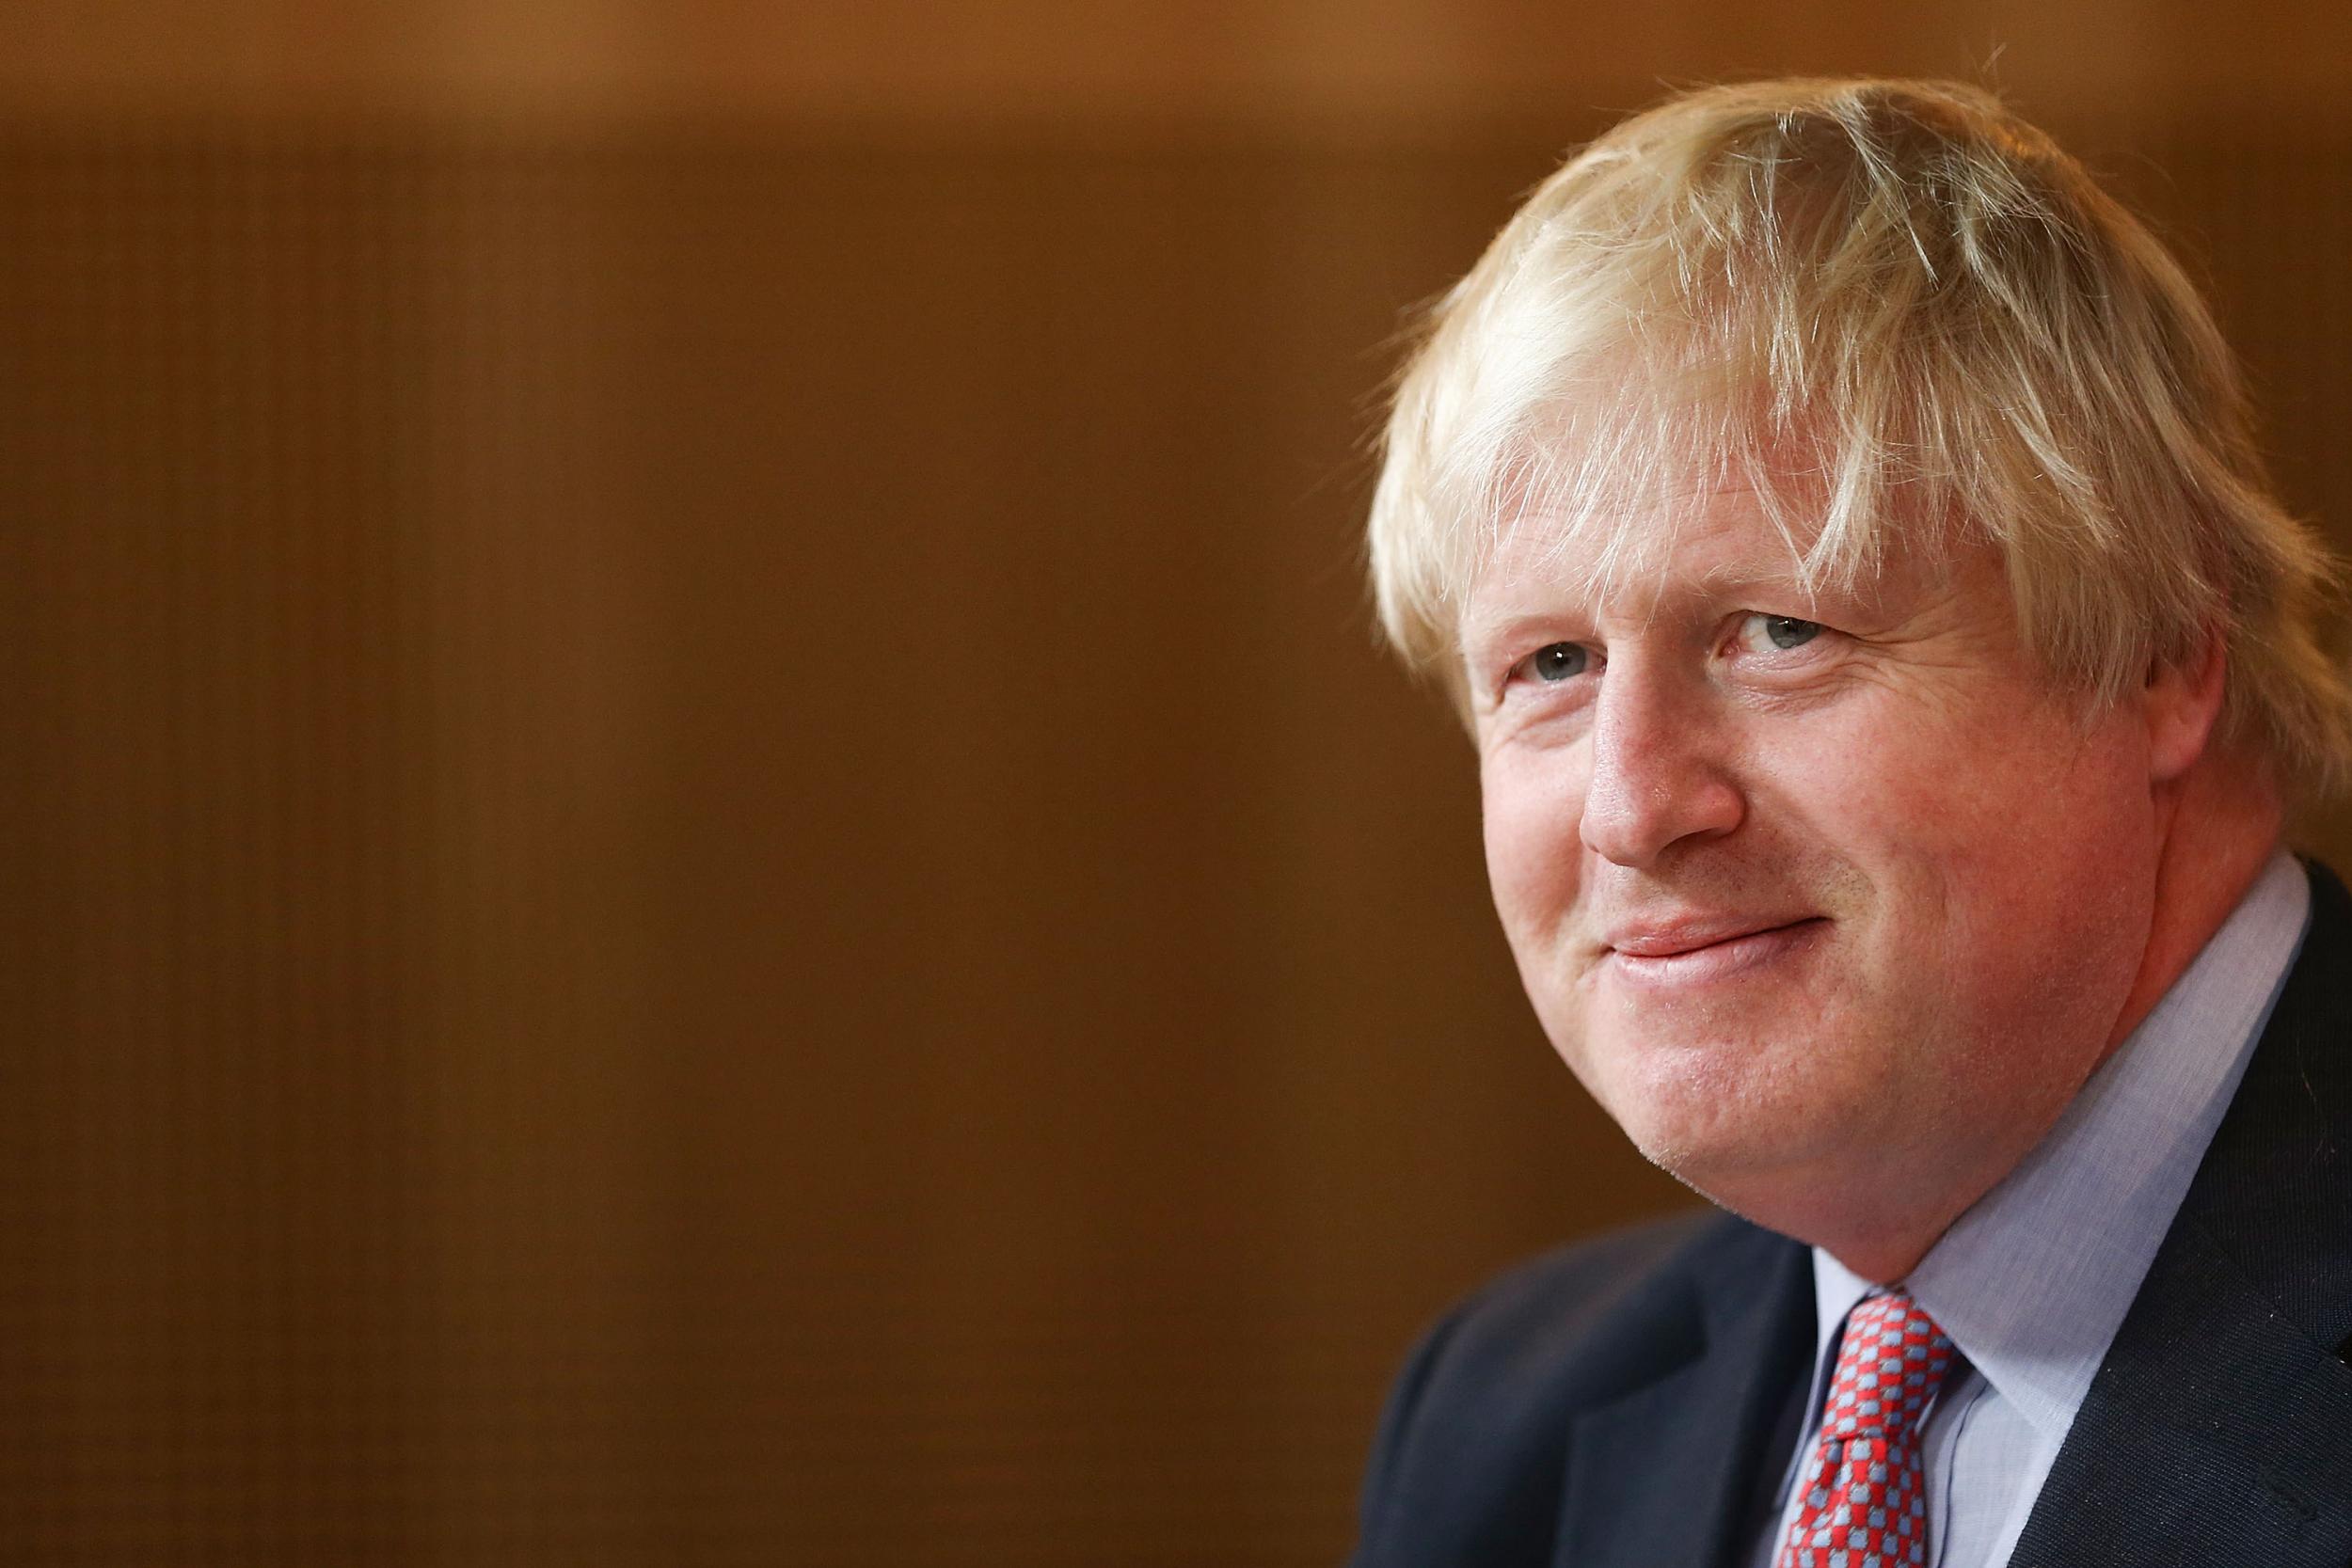 Boris Johnson is expected to deliver his 'liberal Brexit' speech on Valentine's Day